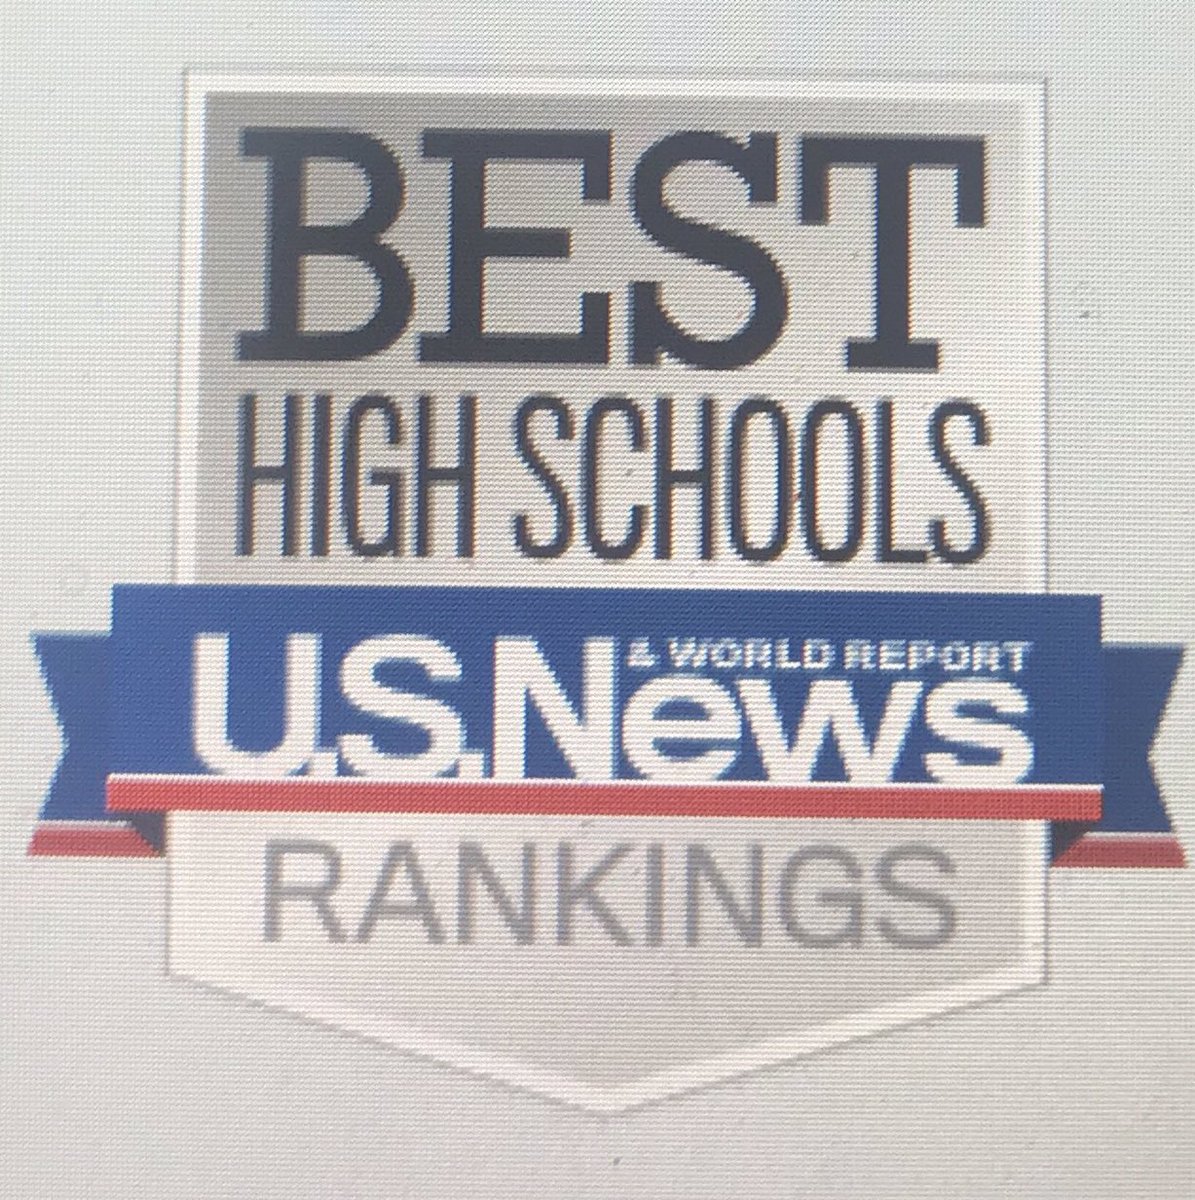 AHS earned recognition in the 2019 US News & World Reports Best High Schools rankings! Over 25,000 schools reviewed! We’re #11 in GA, top 2% Nationally & earned a 98%!! So proud of our students, faculty & community. #Raiderpride
#BestHighSchools